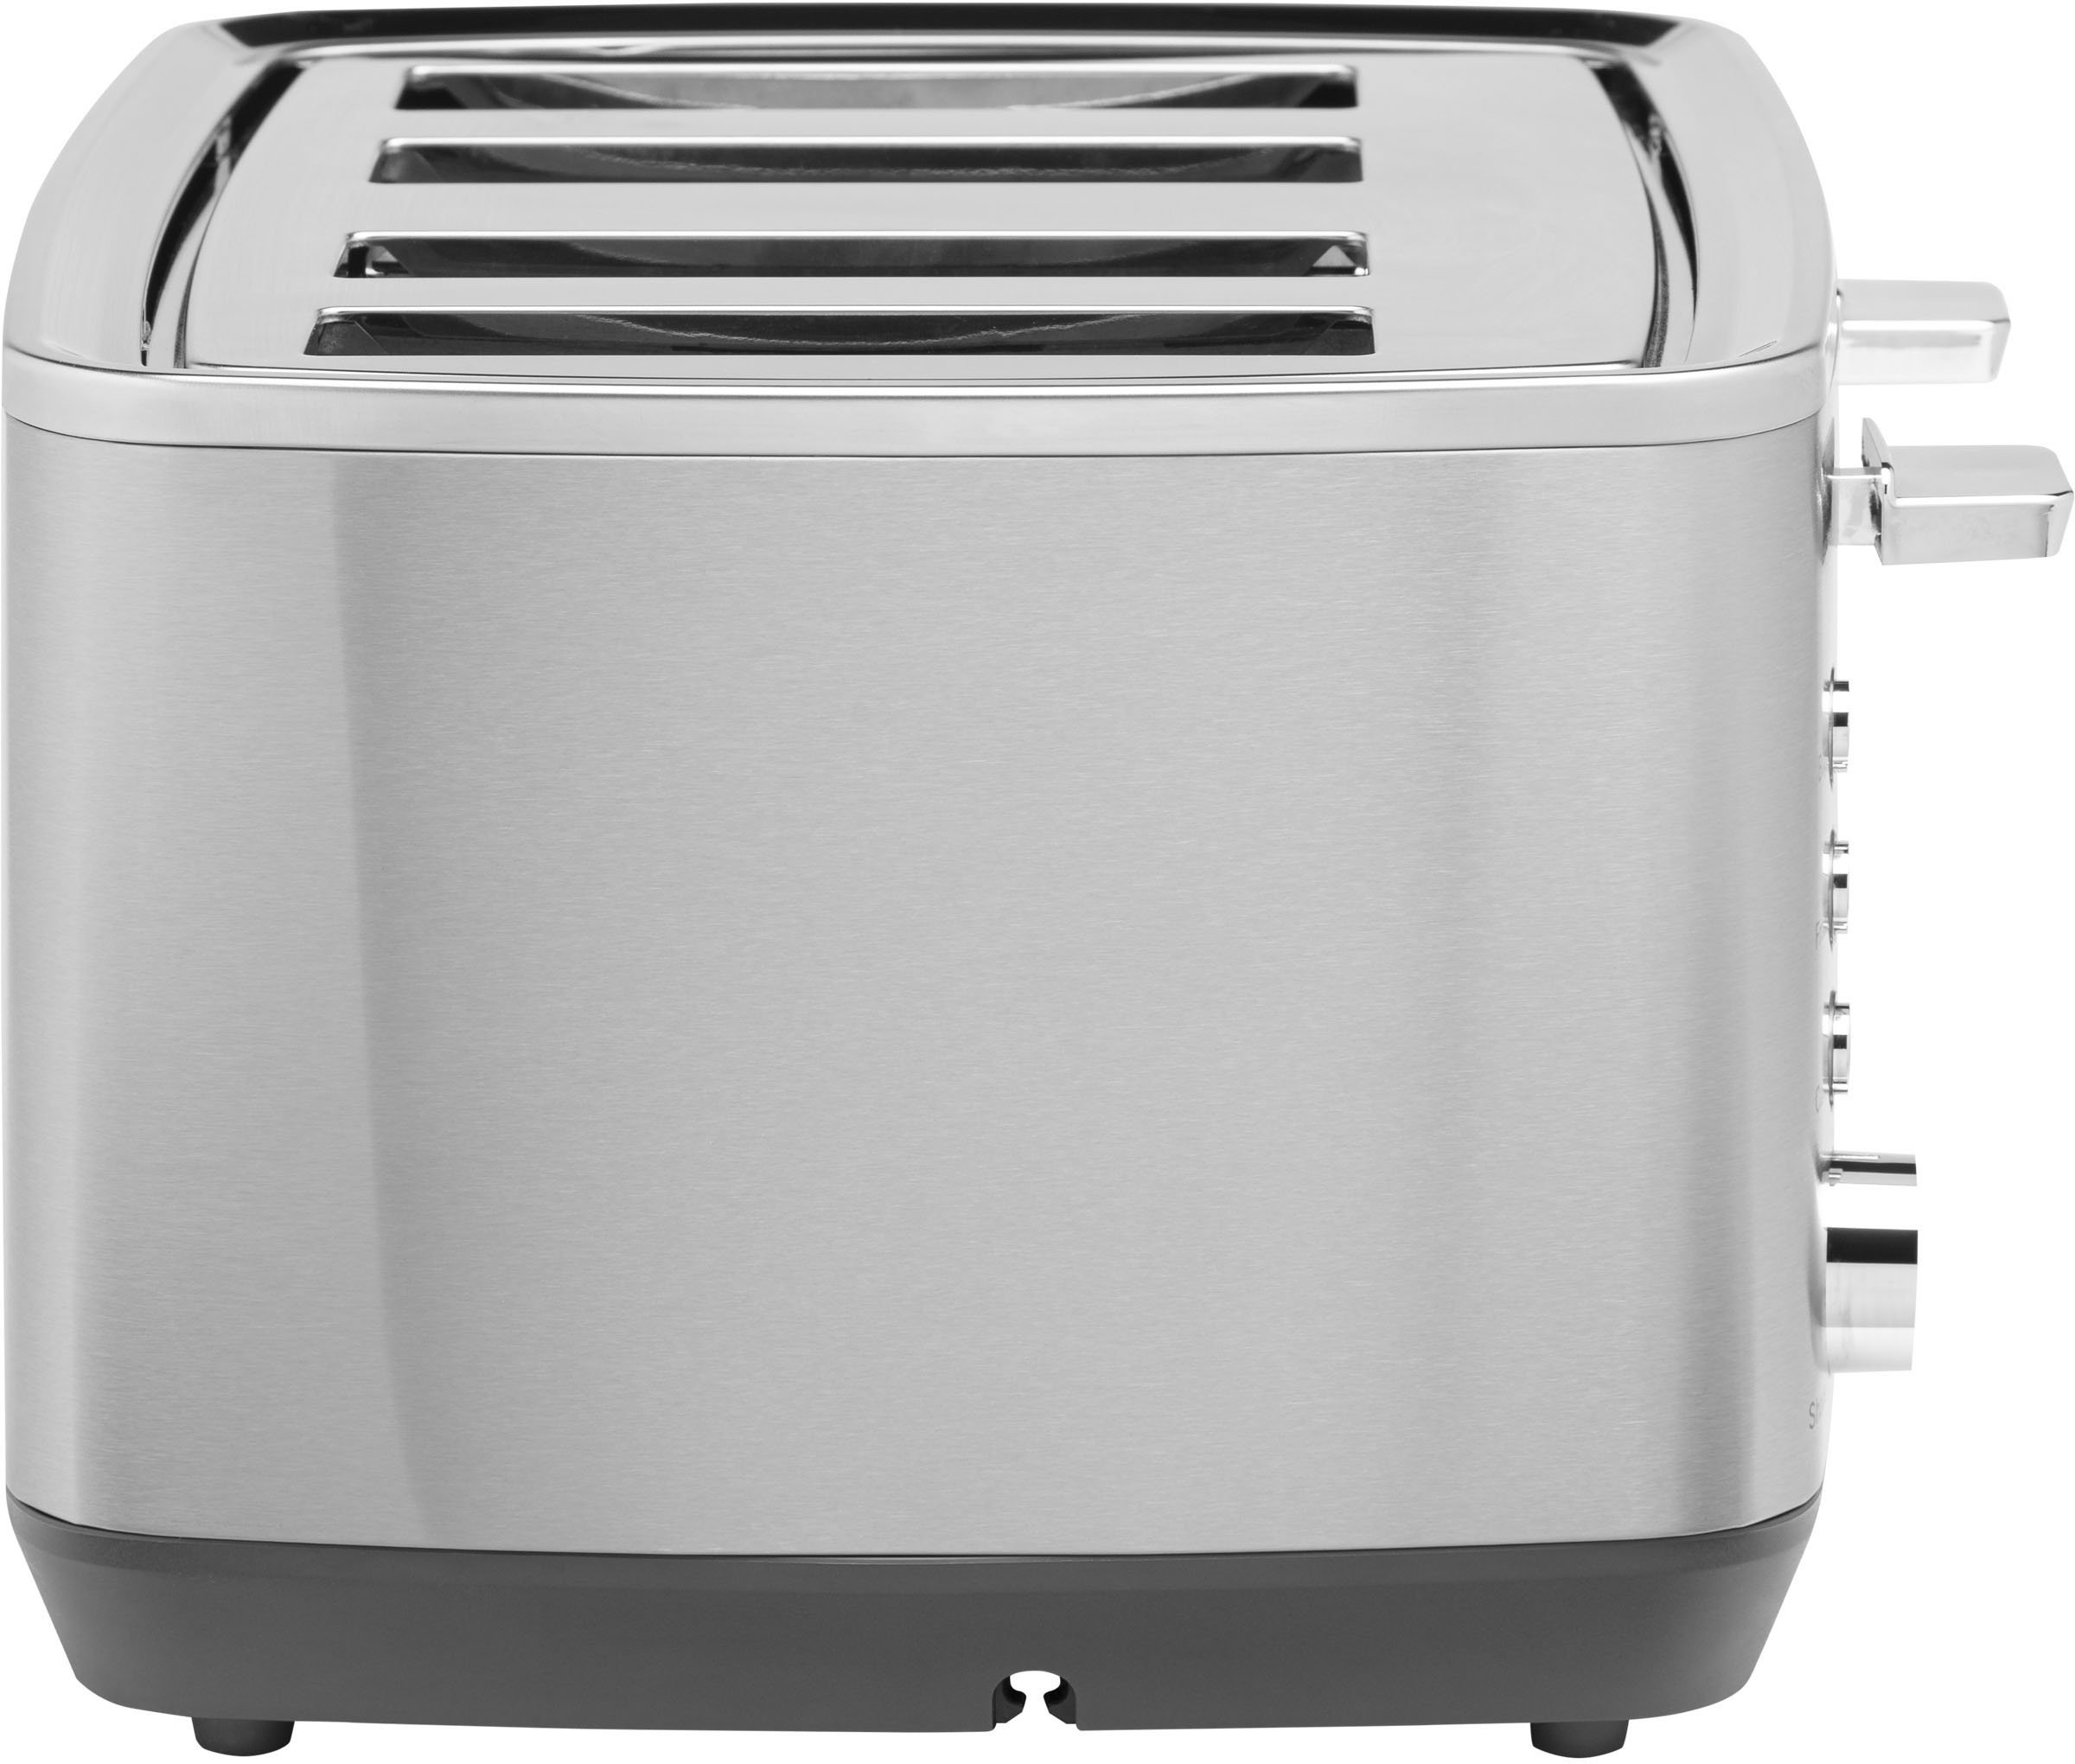 G9TMA2SSPSS in Stainless Steel by GE Appliances in Sioux Falls, SD - GE  2-Slice Toaster